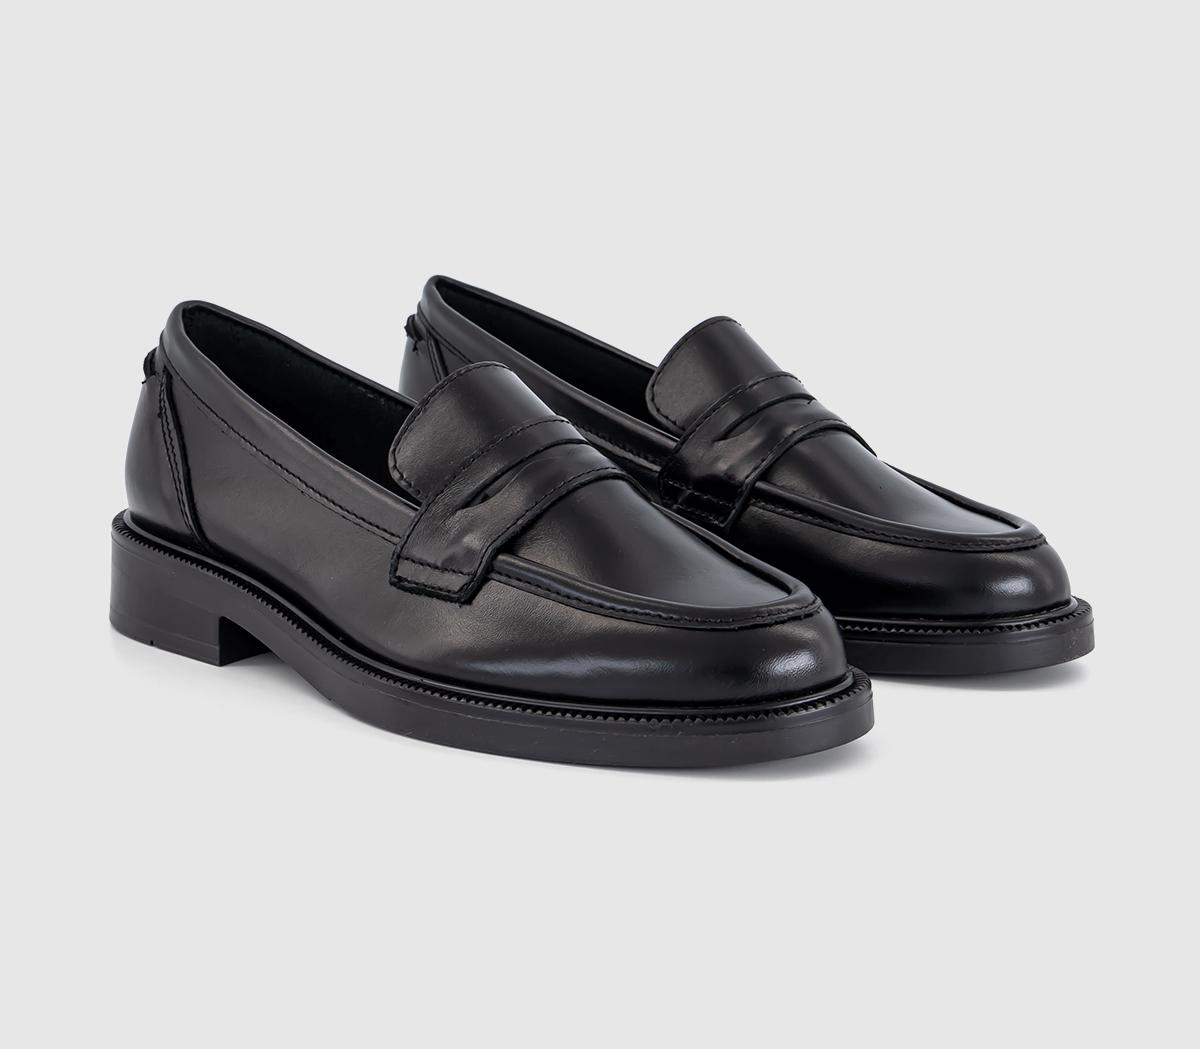 OFFICE Womens Forgive Penny Leather Loafers Black, 6